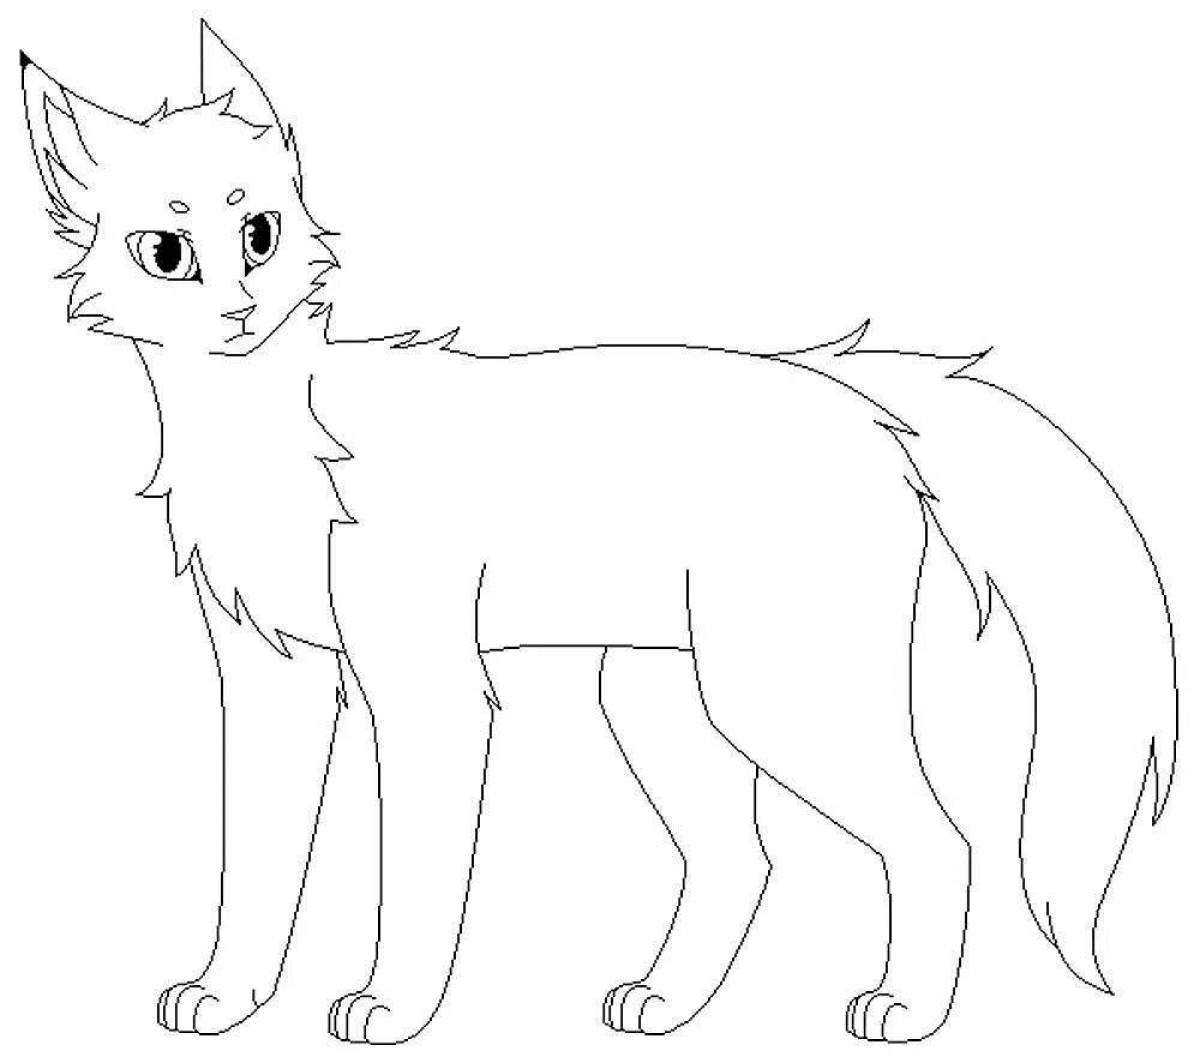 Majestic firestar warrior cats coloring page